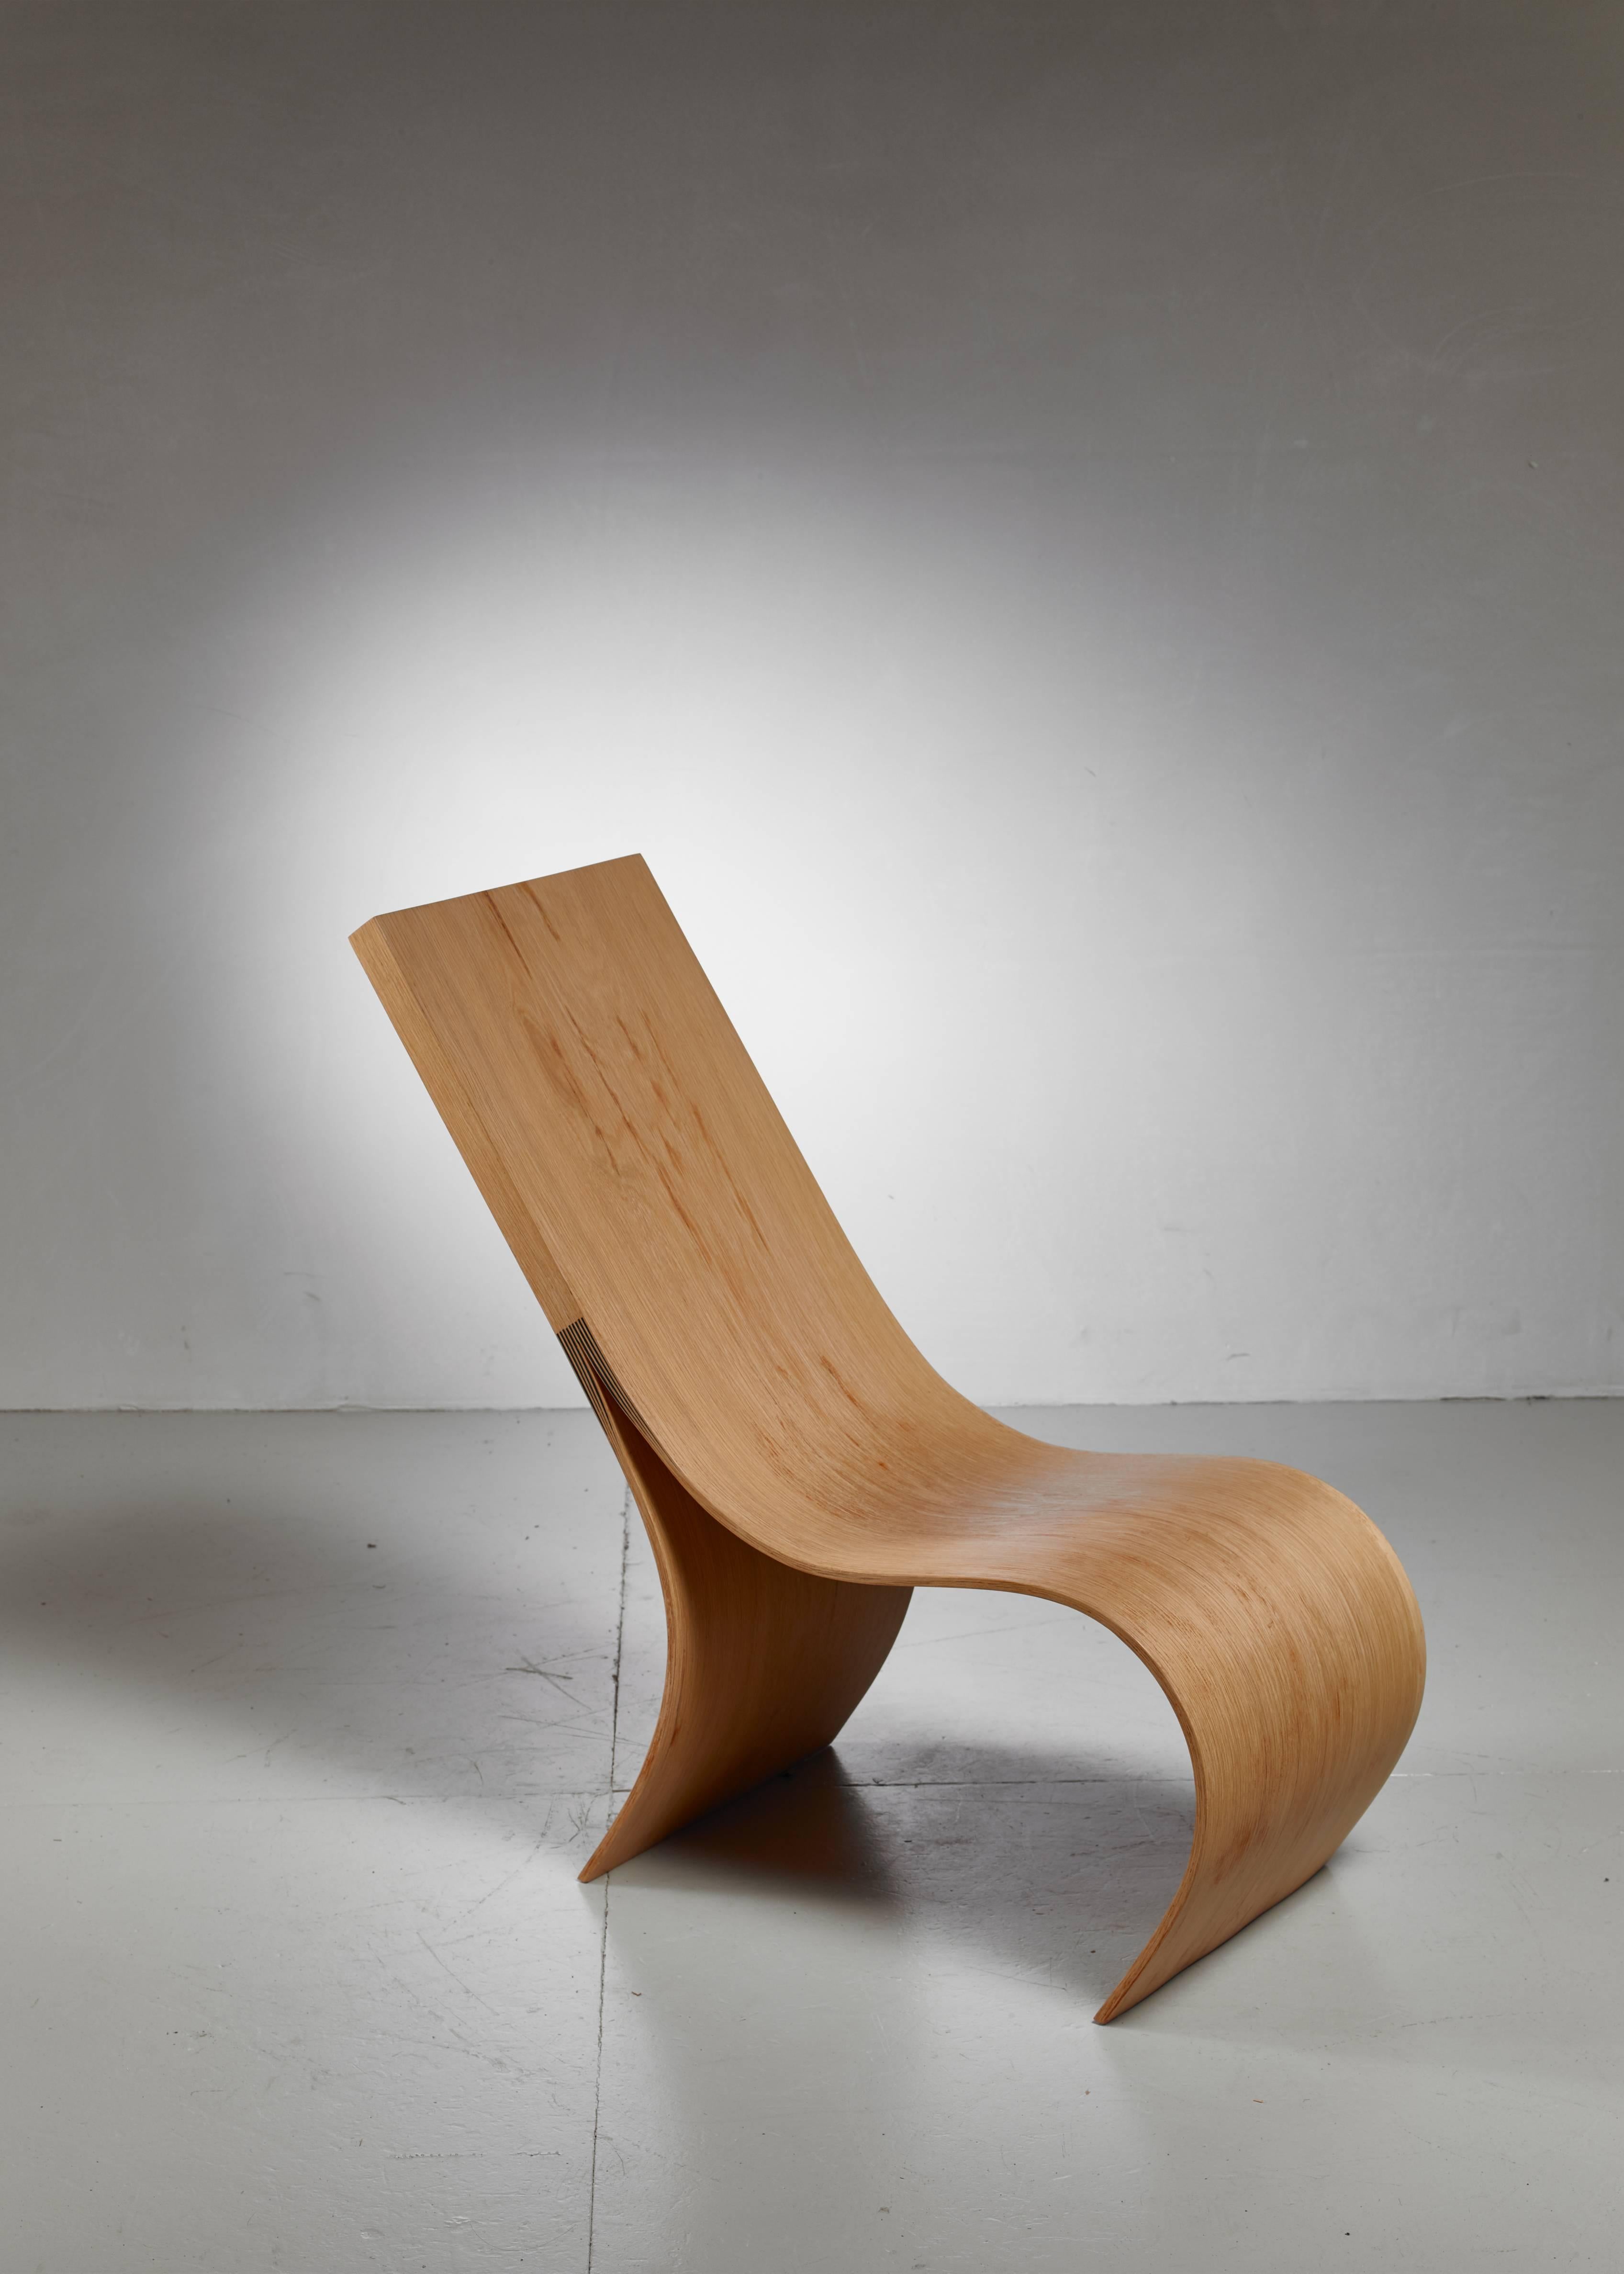 A hand formed lounge chair made from a solid piece of oak from a naturally fallen tree, by Belgian artist Kaspar Hamacher.

Hamacher (1981), son of a forester, uses nature as the main inspiration for his work, with wood being his preferred